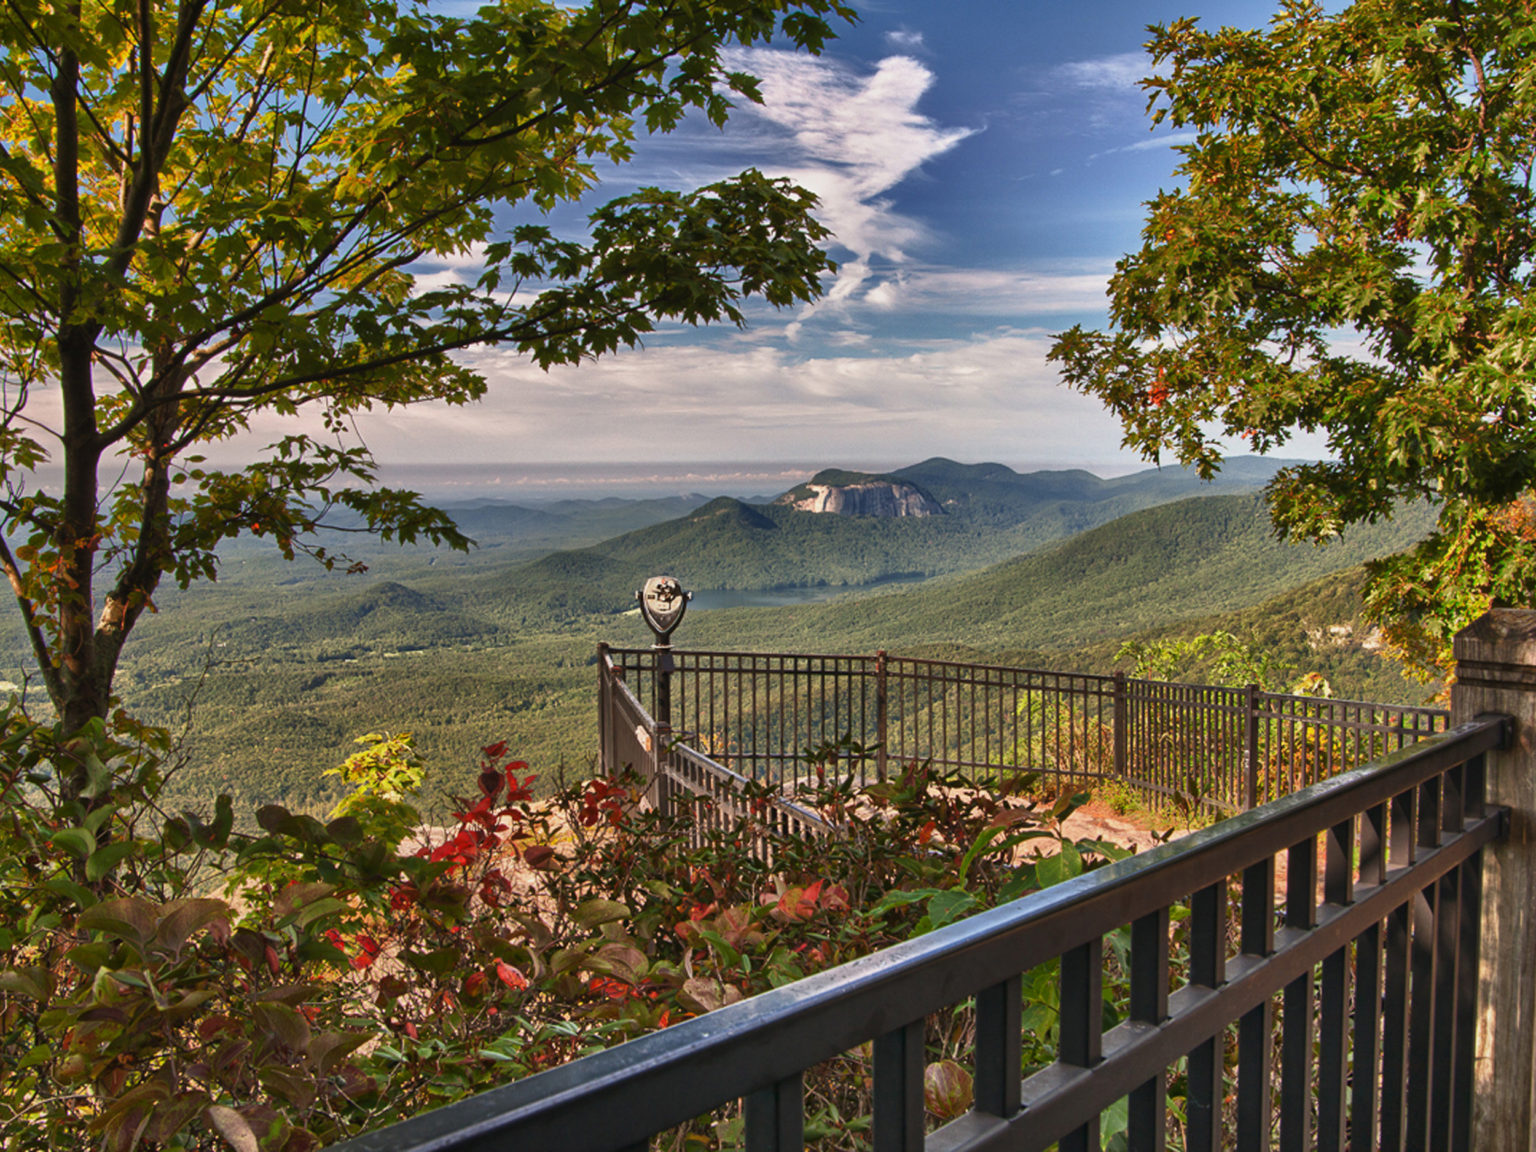 Caesars Head State Park offers some of the best views of nature in the state.